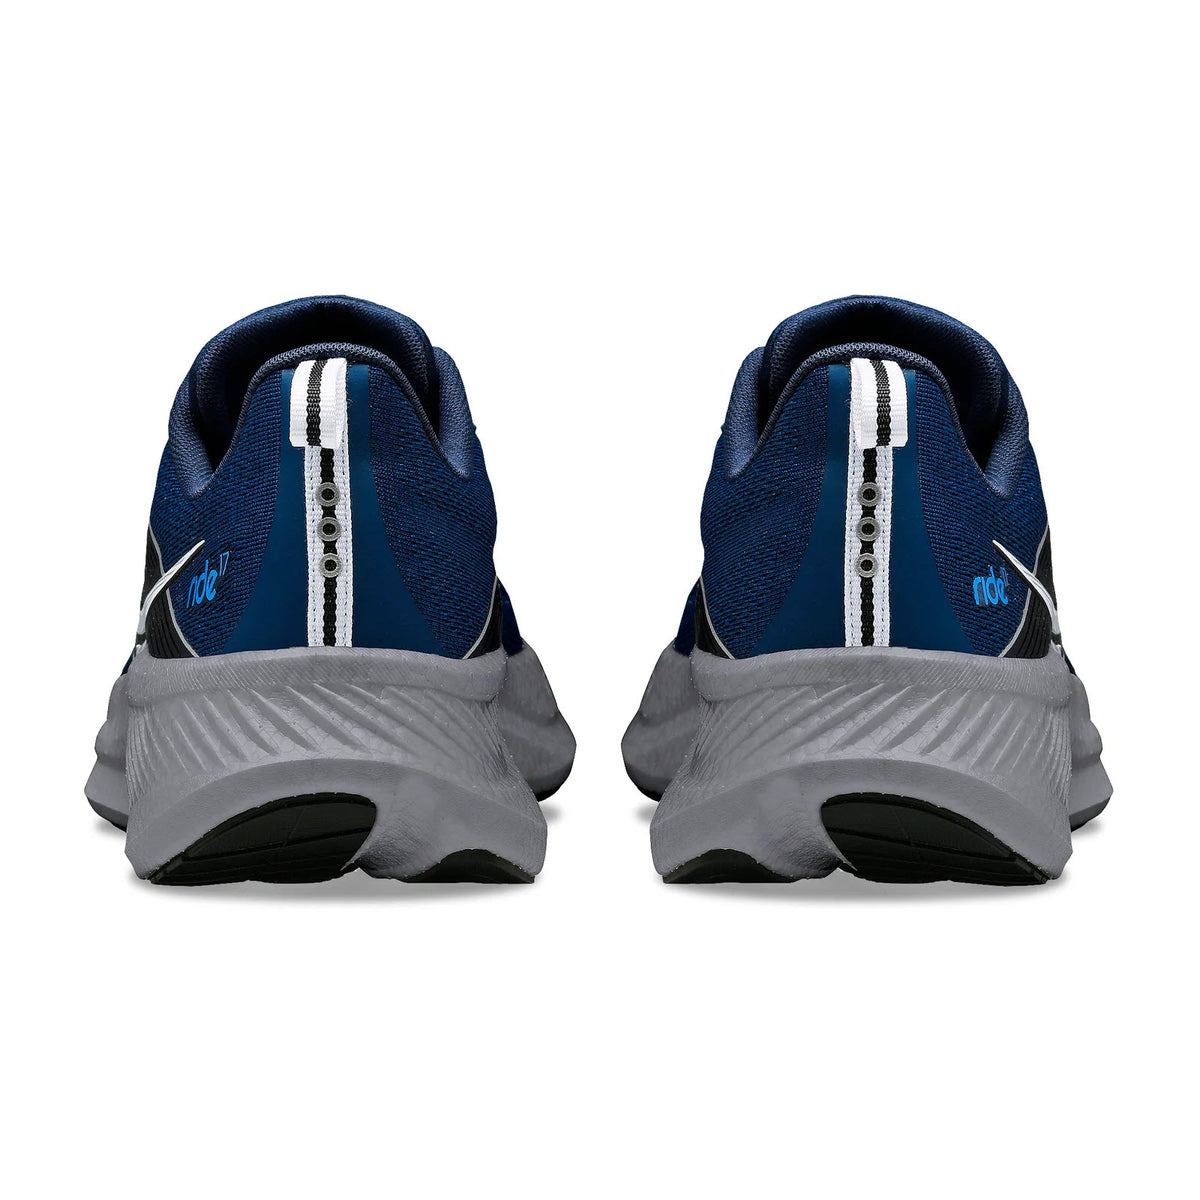 A pair of blue and gray Saucony Ride 17 Tide/Silver - Mens running shoes with white laces and a visible brand logo on the heel.